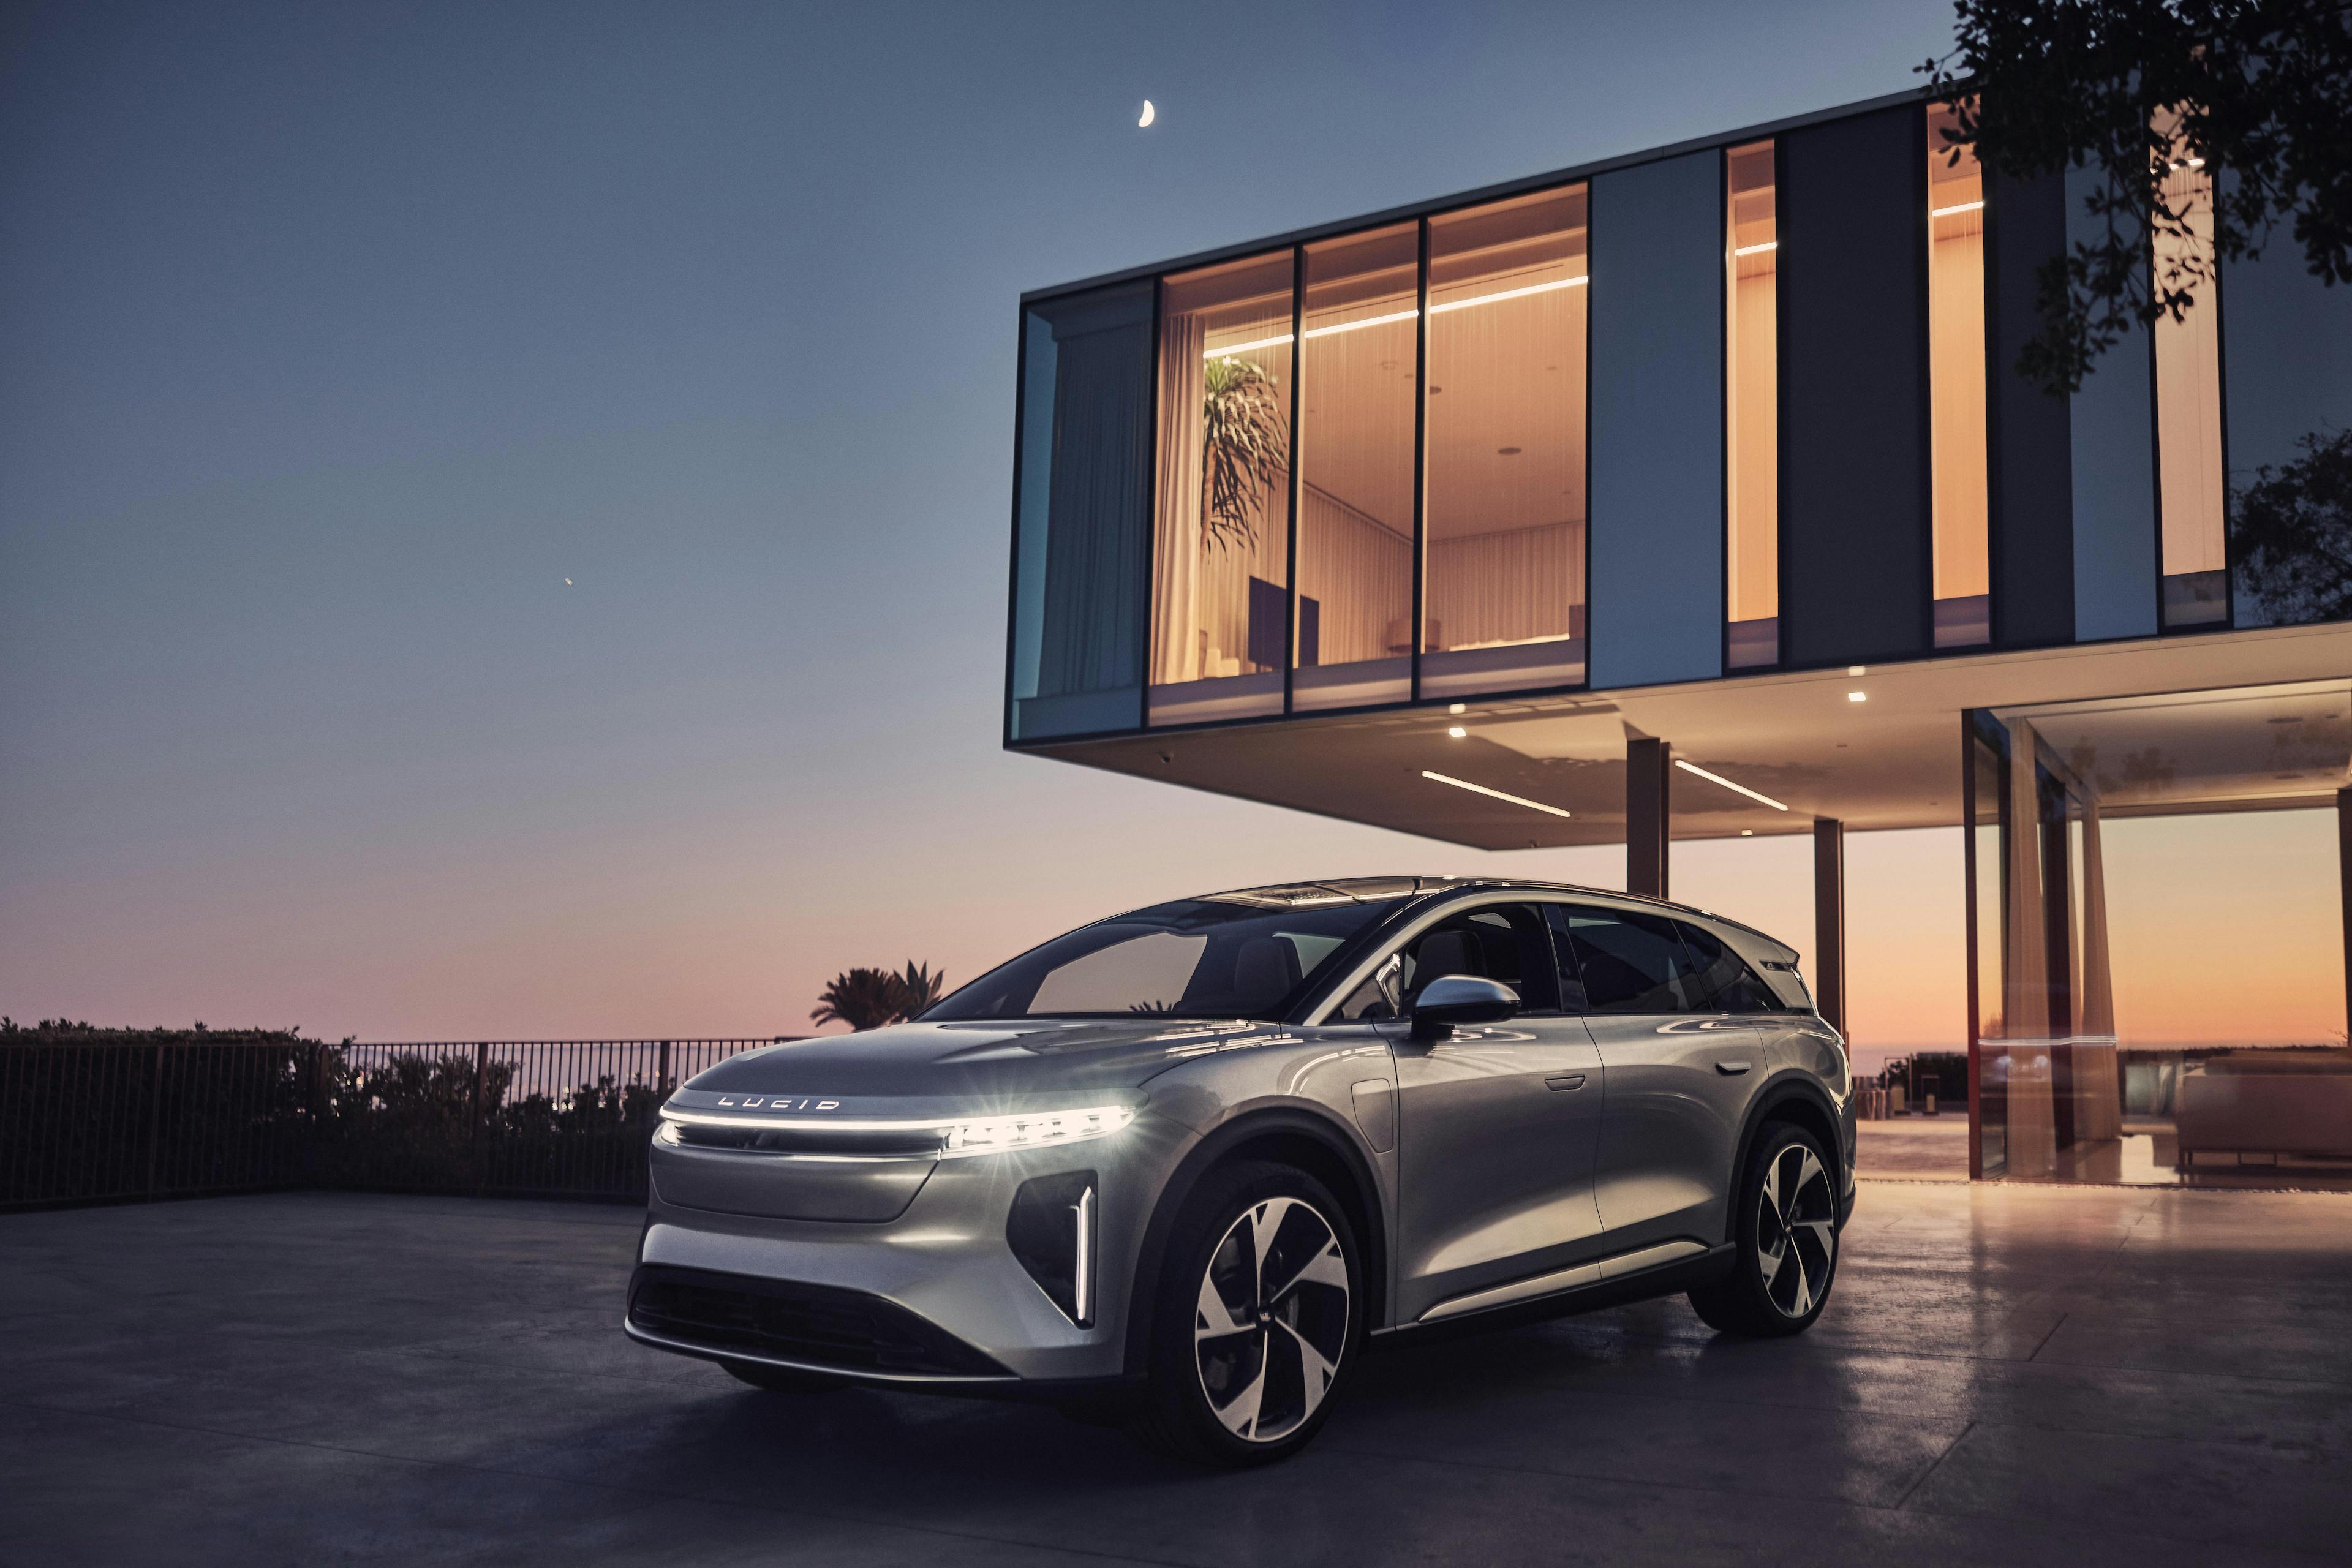 Elevate adventure in the luxury electric SUV of tomorrow.